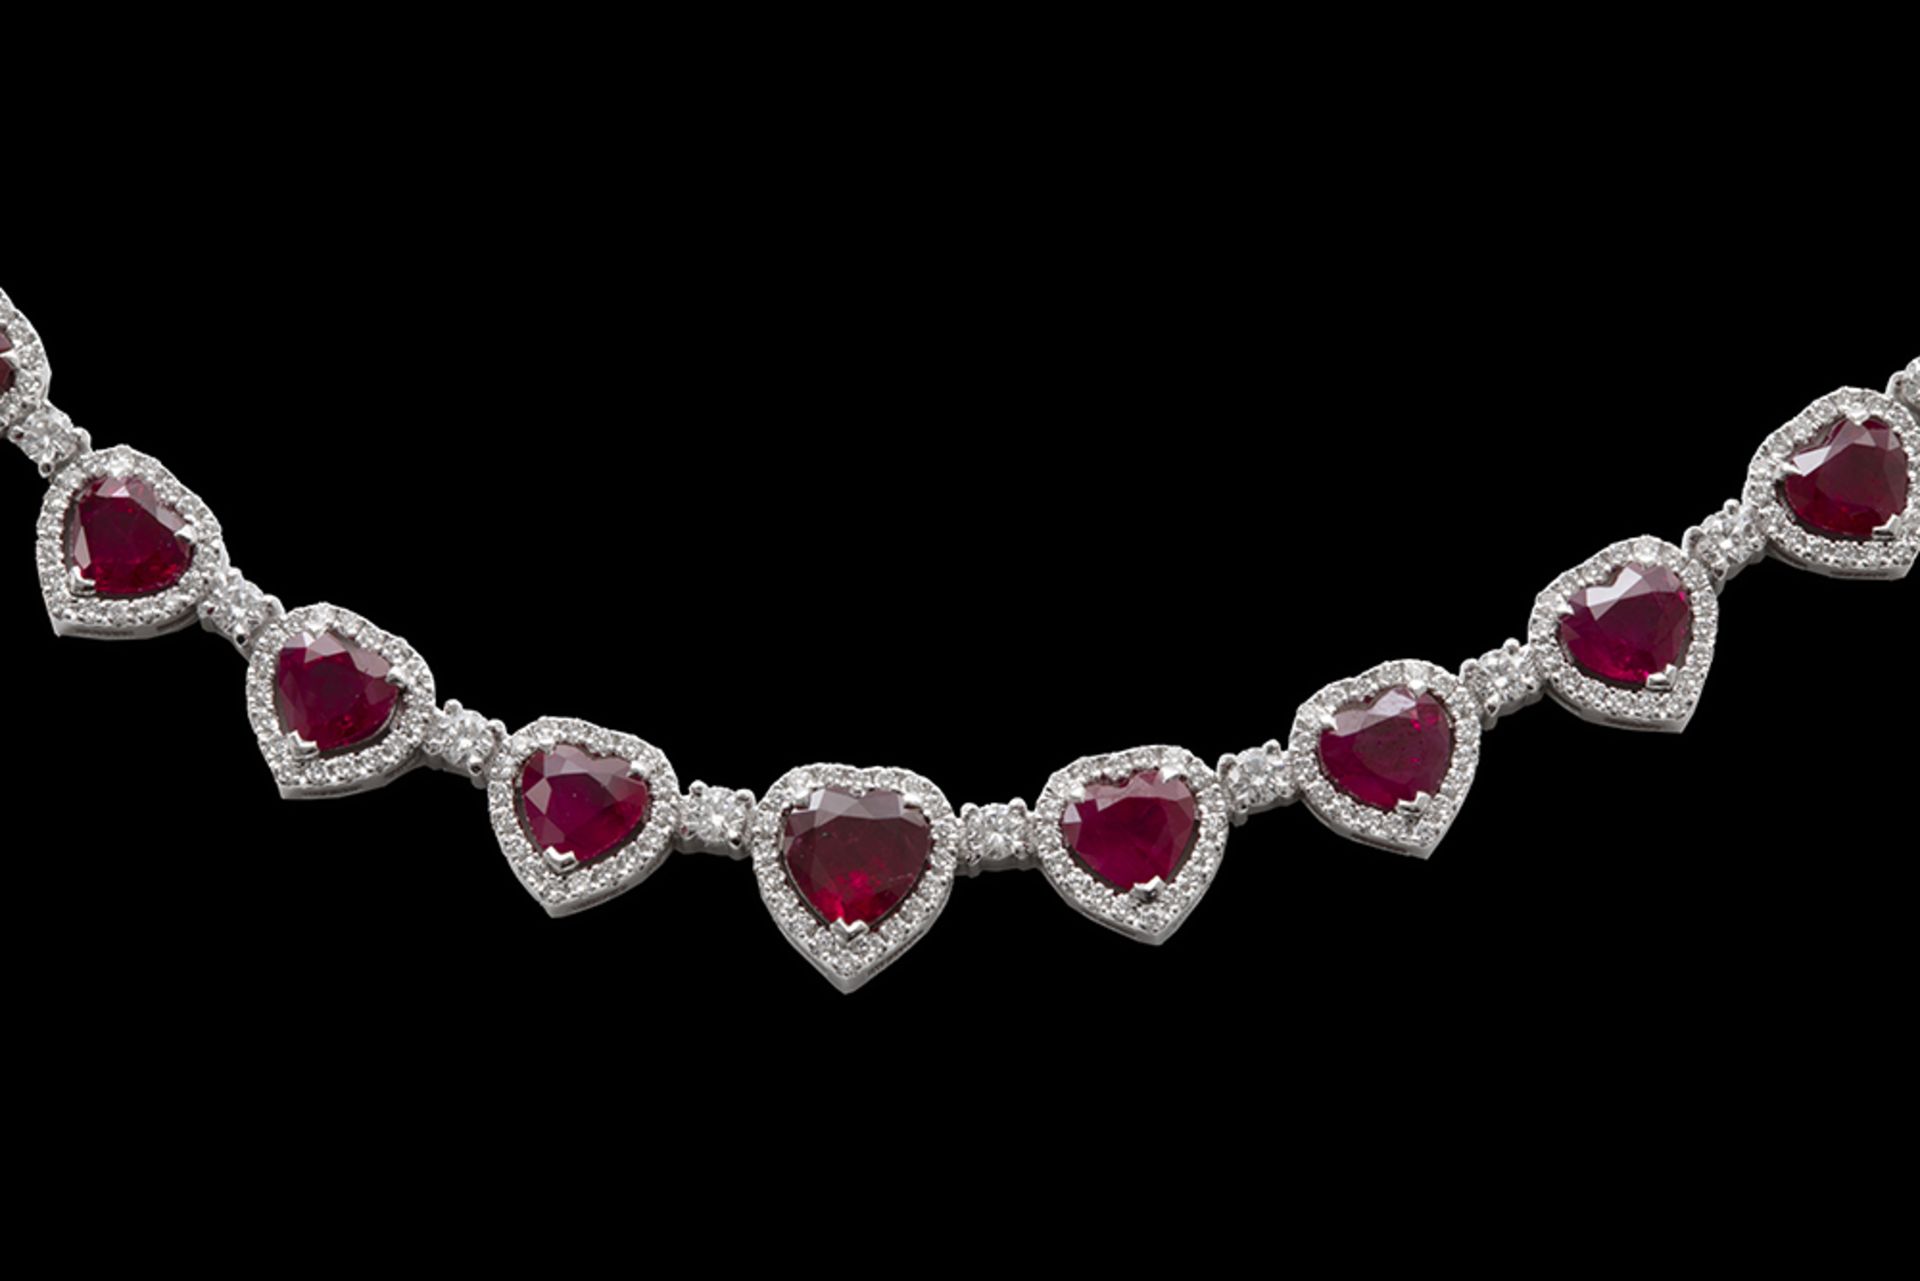 superb necklace in white gold (18 carat) with 18 carat of high quality "pigeon blood" rubies and 6, - Bild 2 aus 4